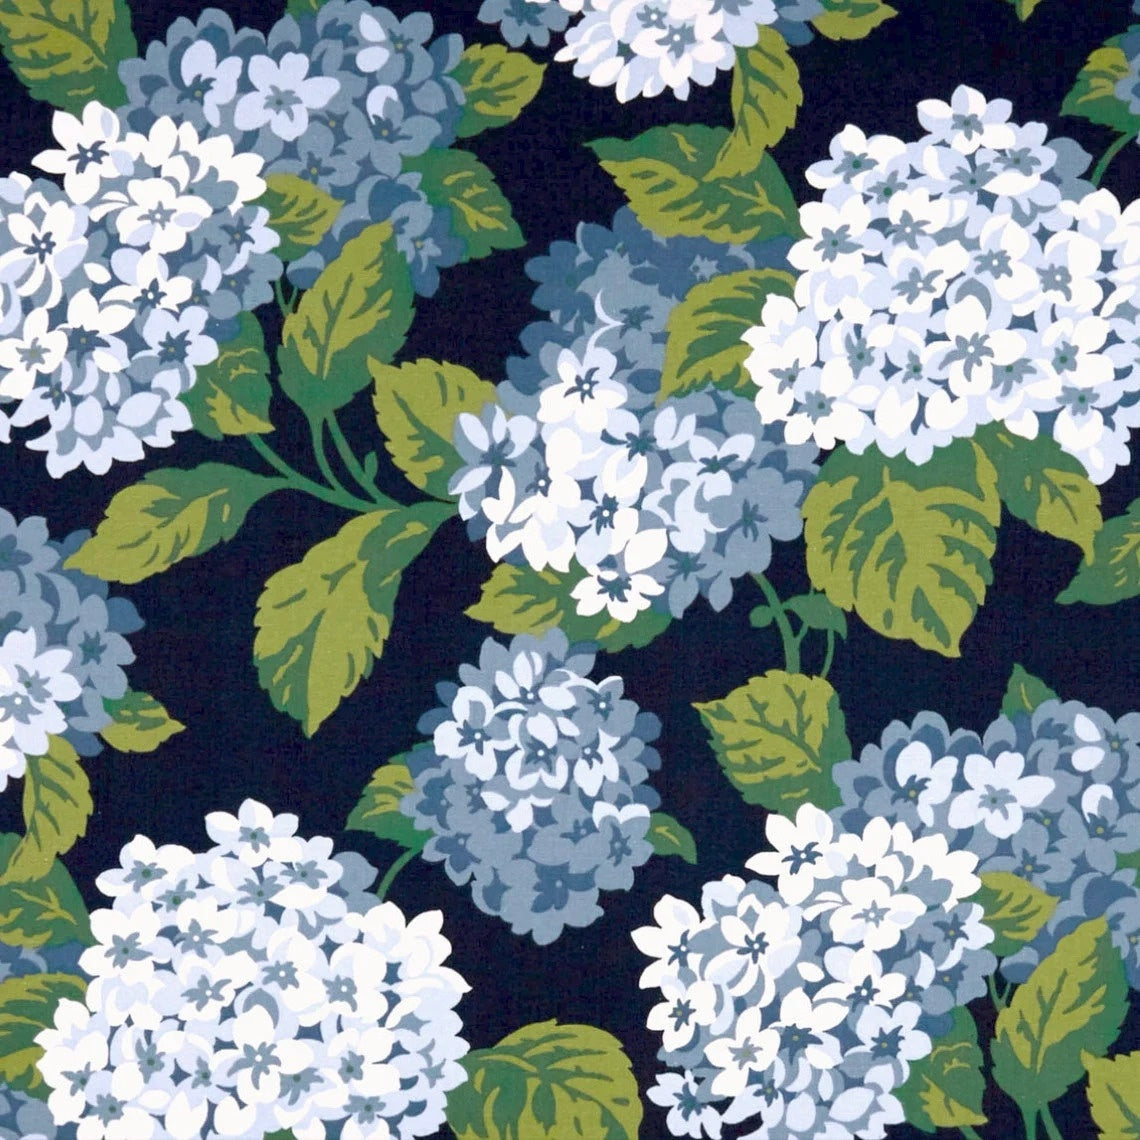 scallop valance in summerwind navy blue hydrangea floral, large scale